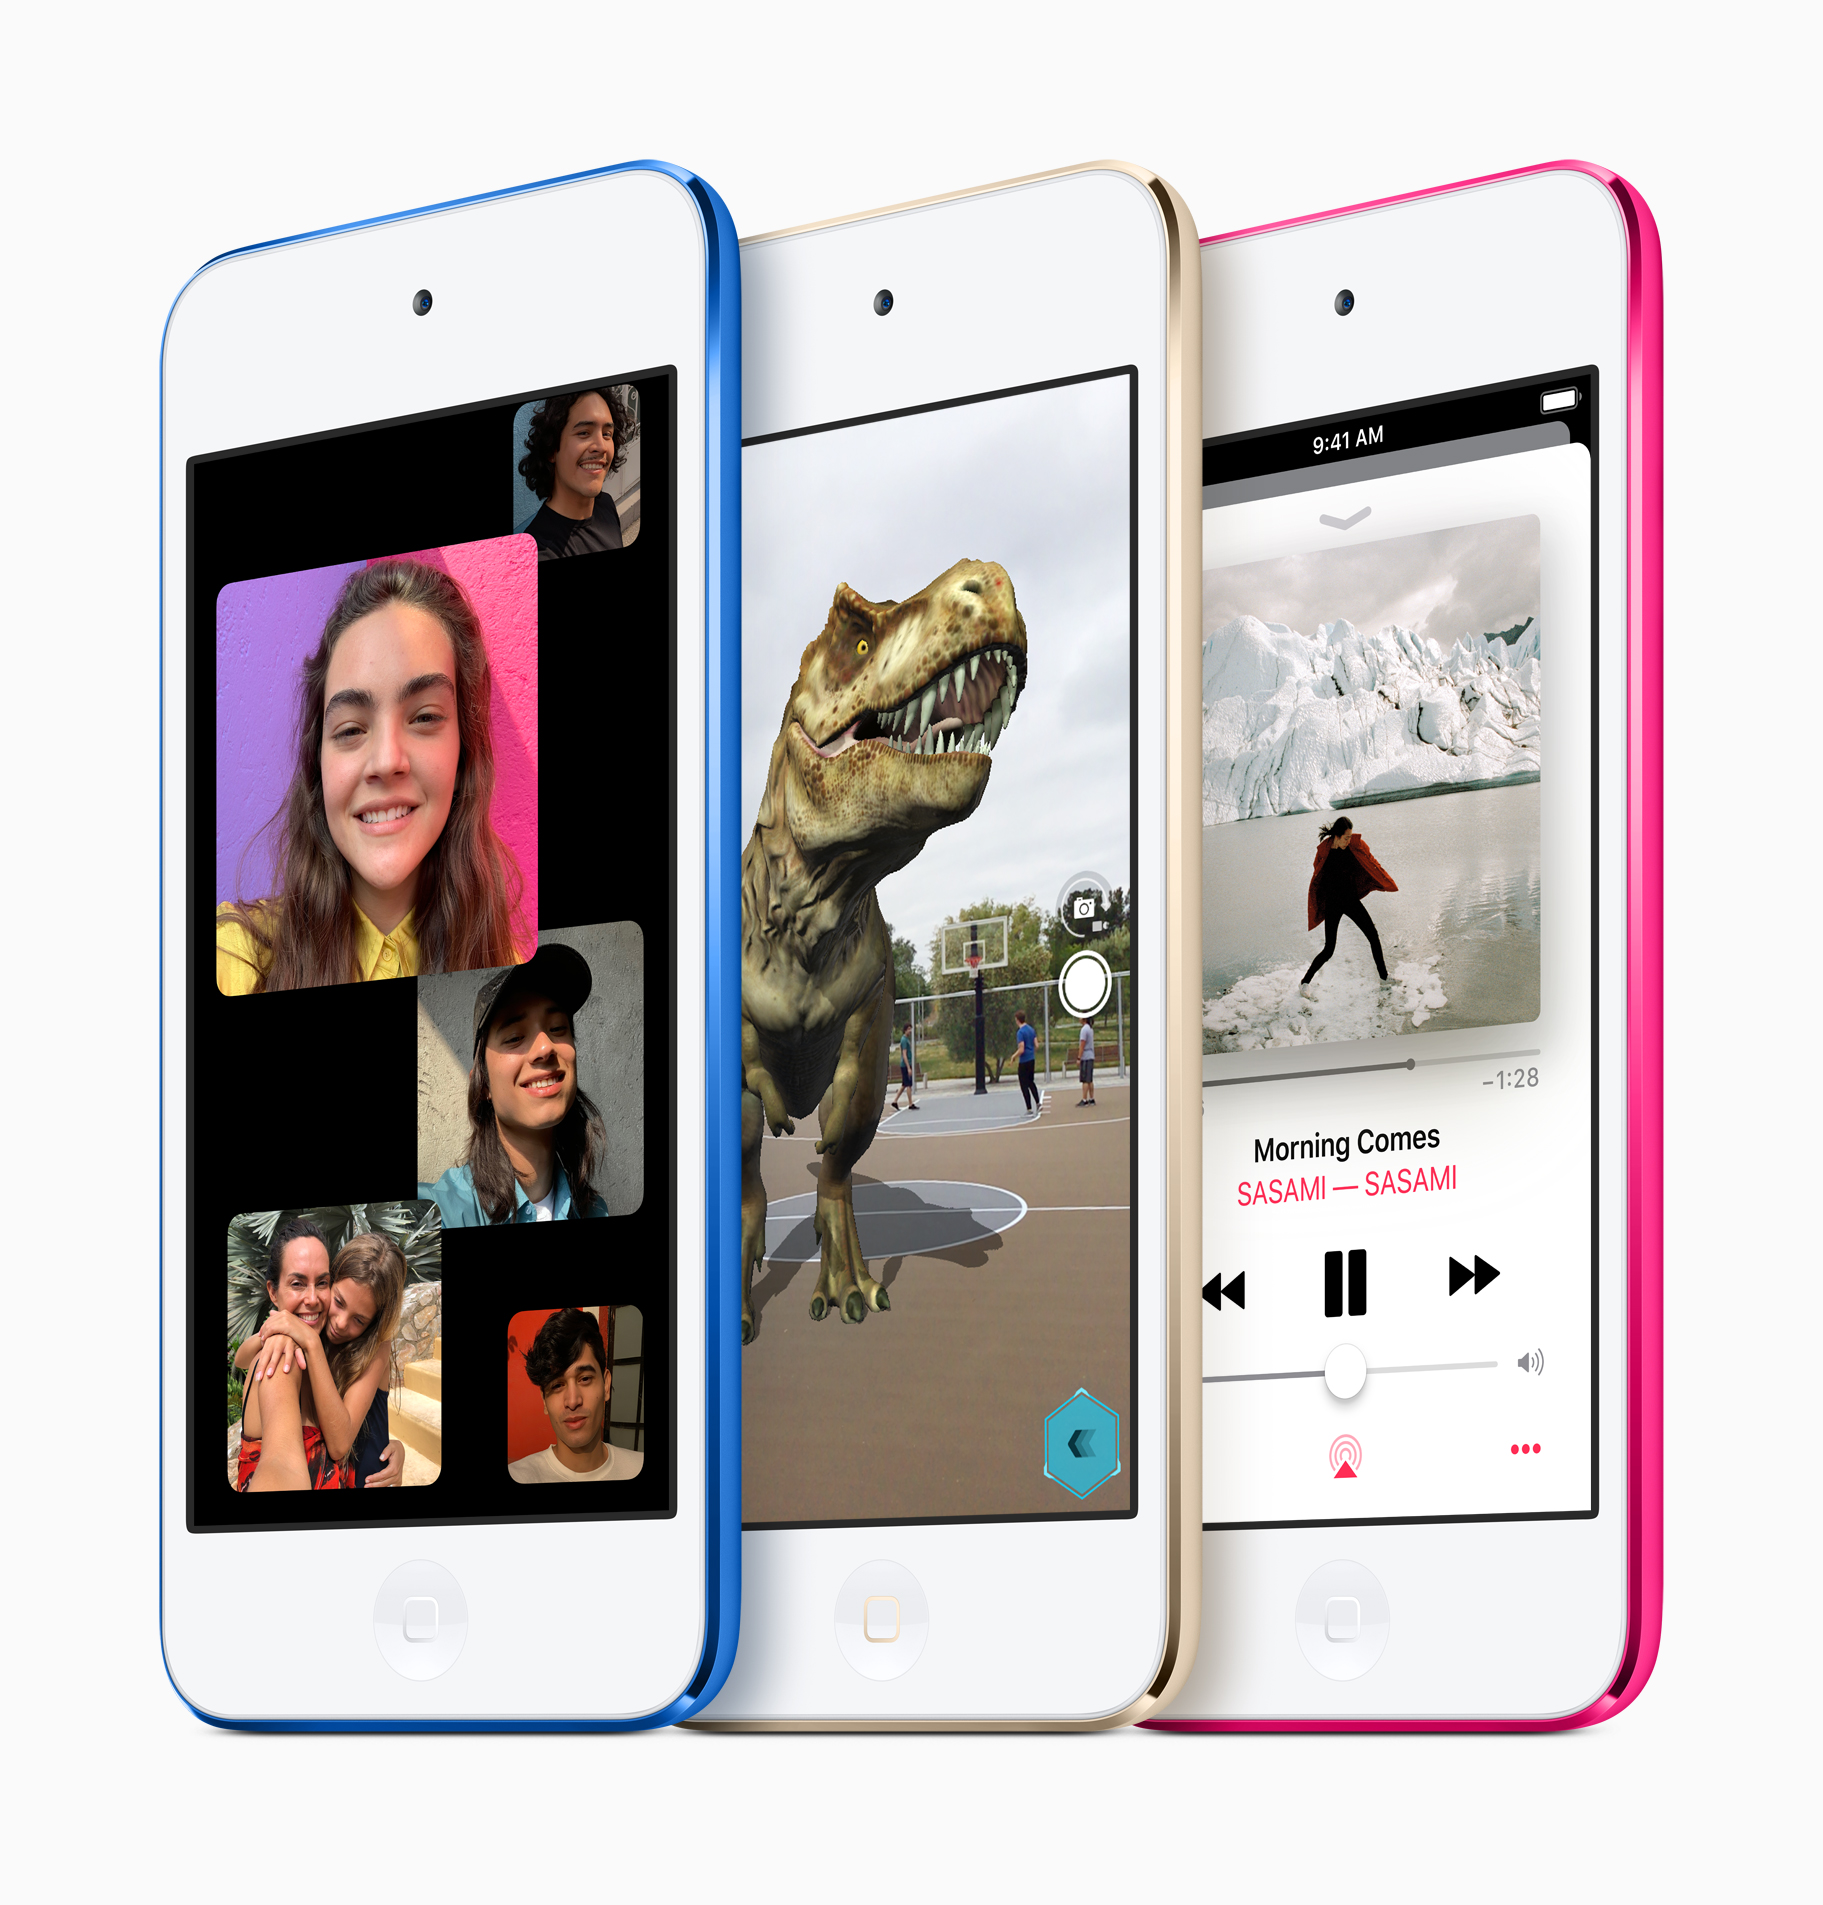 5 reasons you might actually want to buy the new iPod Touch